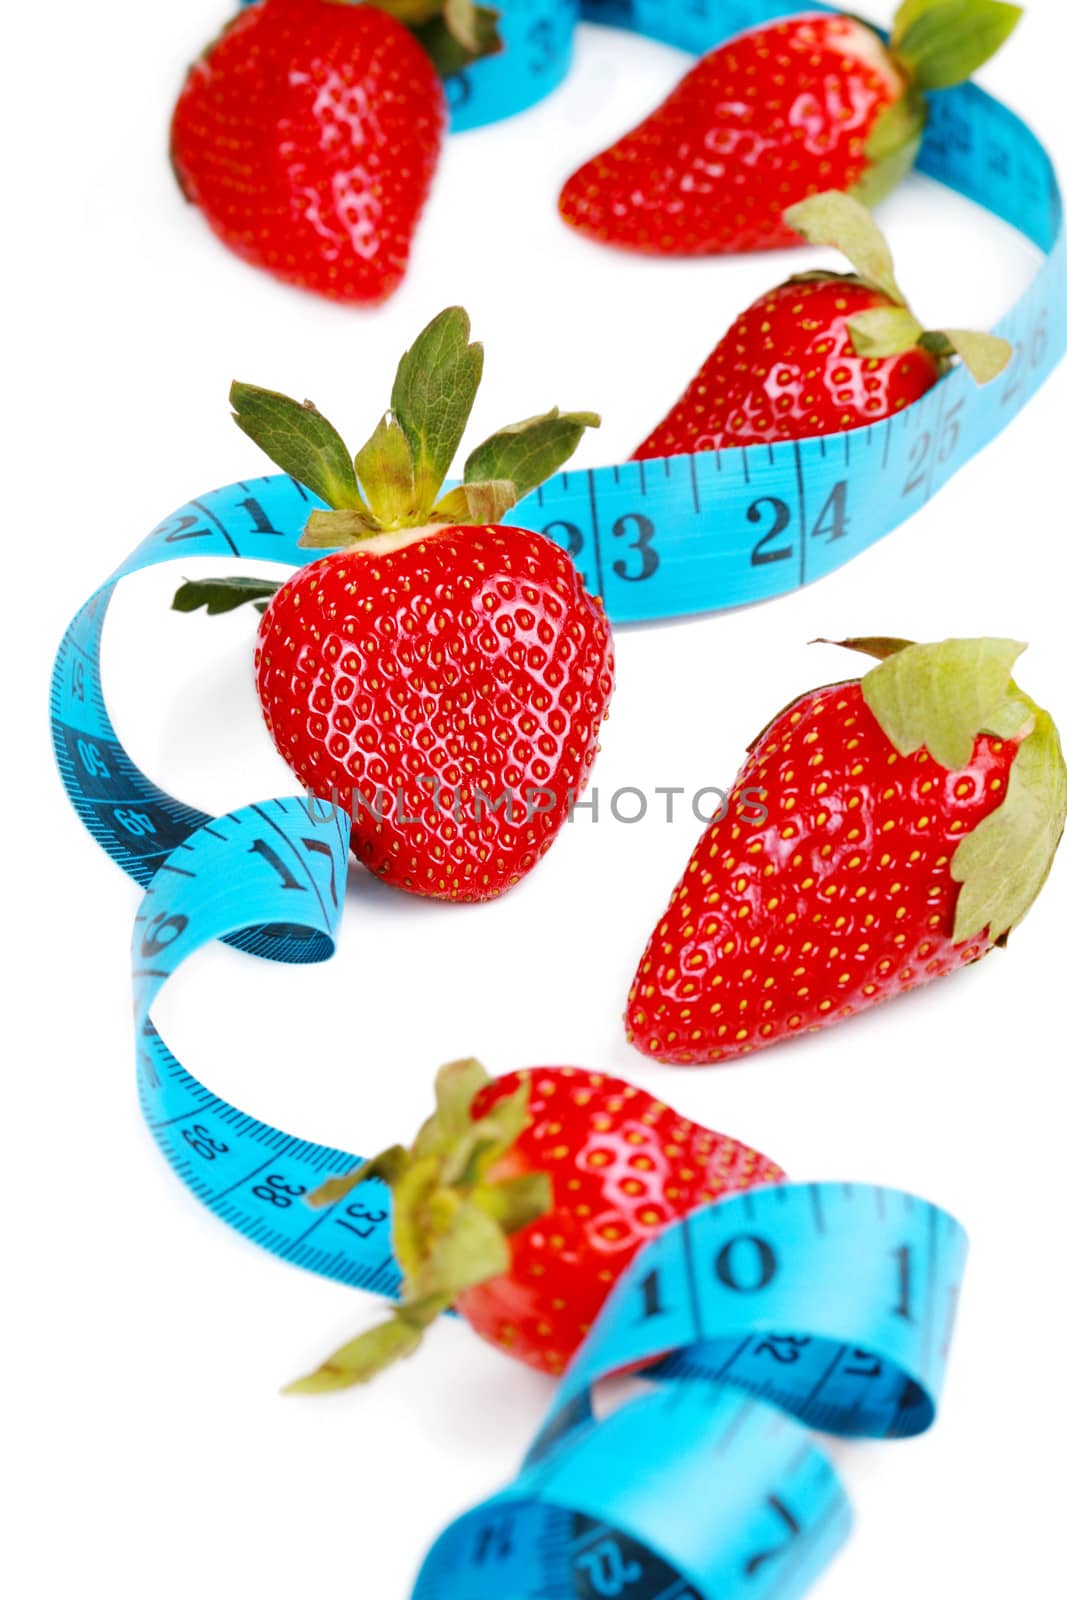 Healthy eating with fruit, strawberries. Berries with tape measure. health concept.